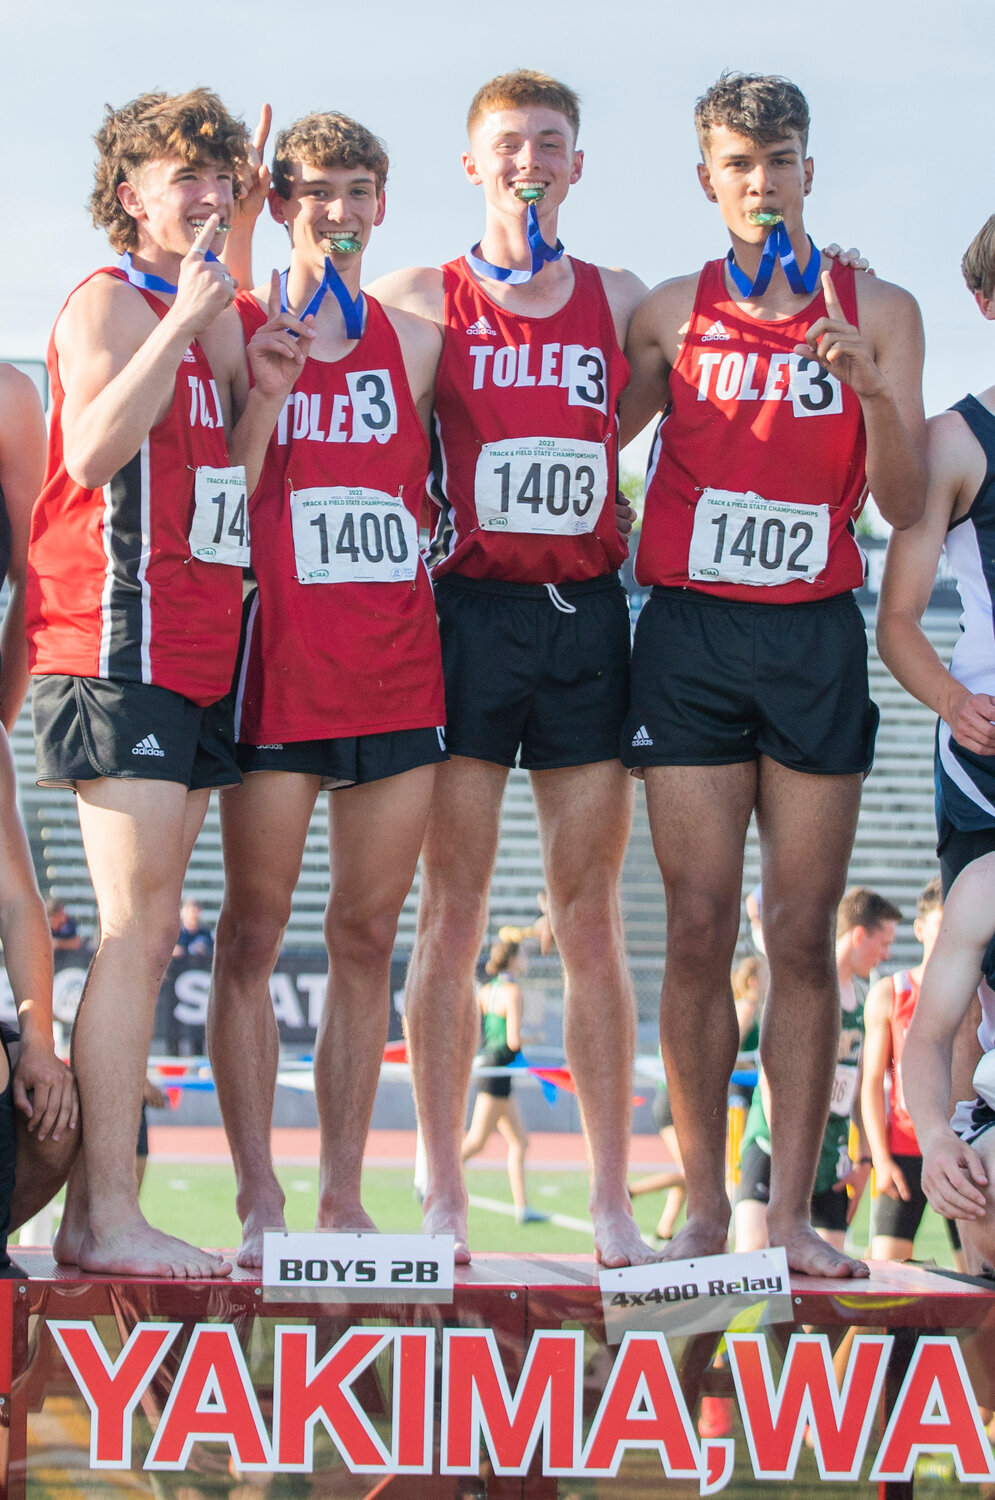 From left, Toledo’s 4x400 championship relay team, Trevin Gale, John Rose, Conner Olmstead and Jordan McKenzie pose with their gold medals atop a podium at the 2B State track and field meet in Yakima on Saturday.